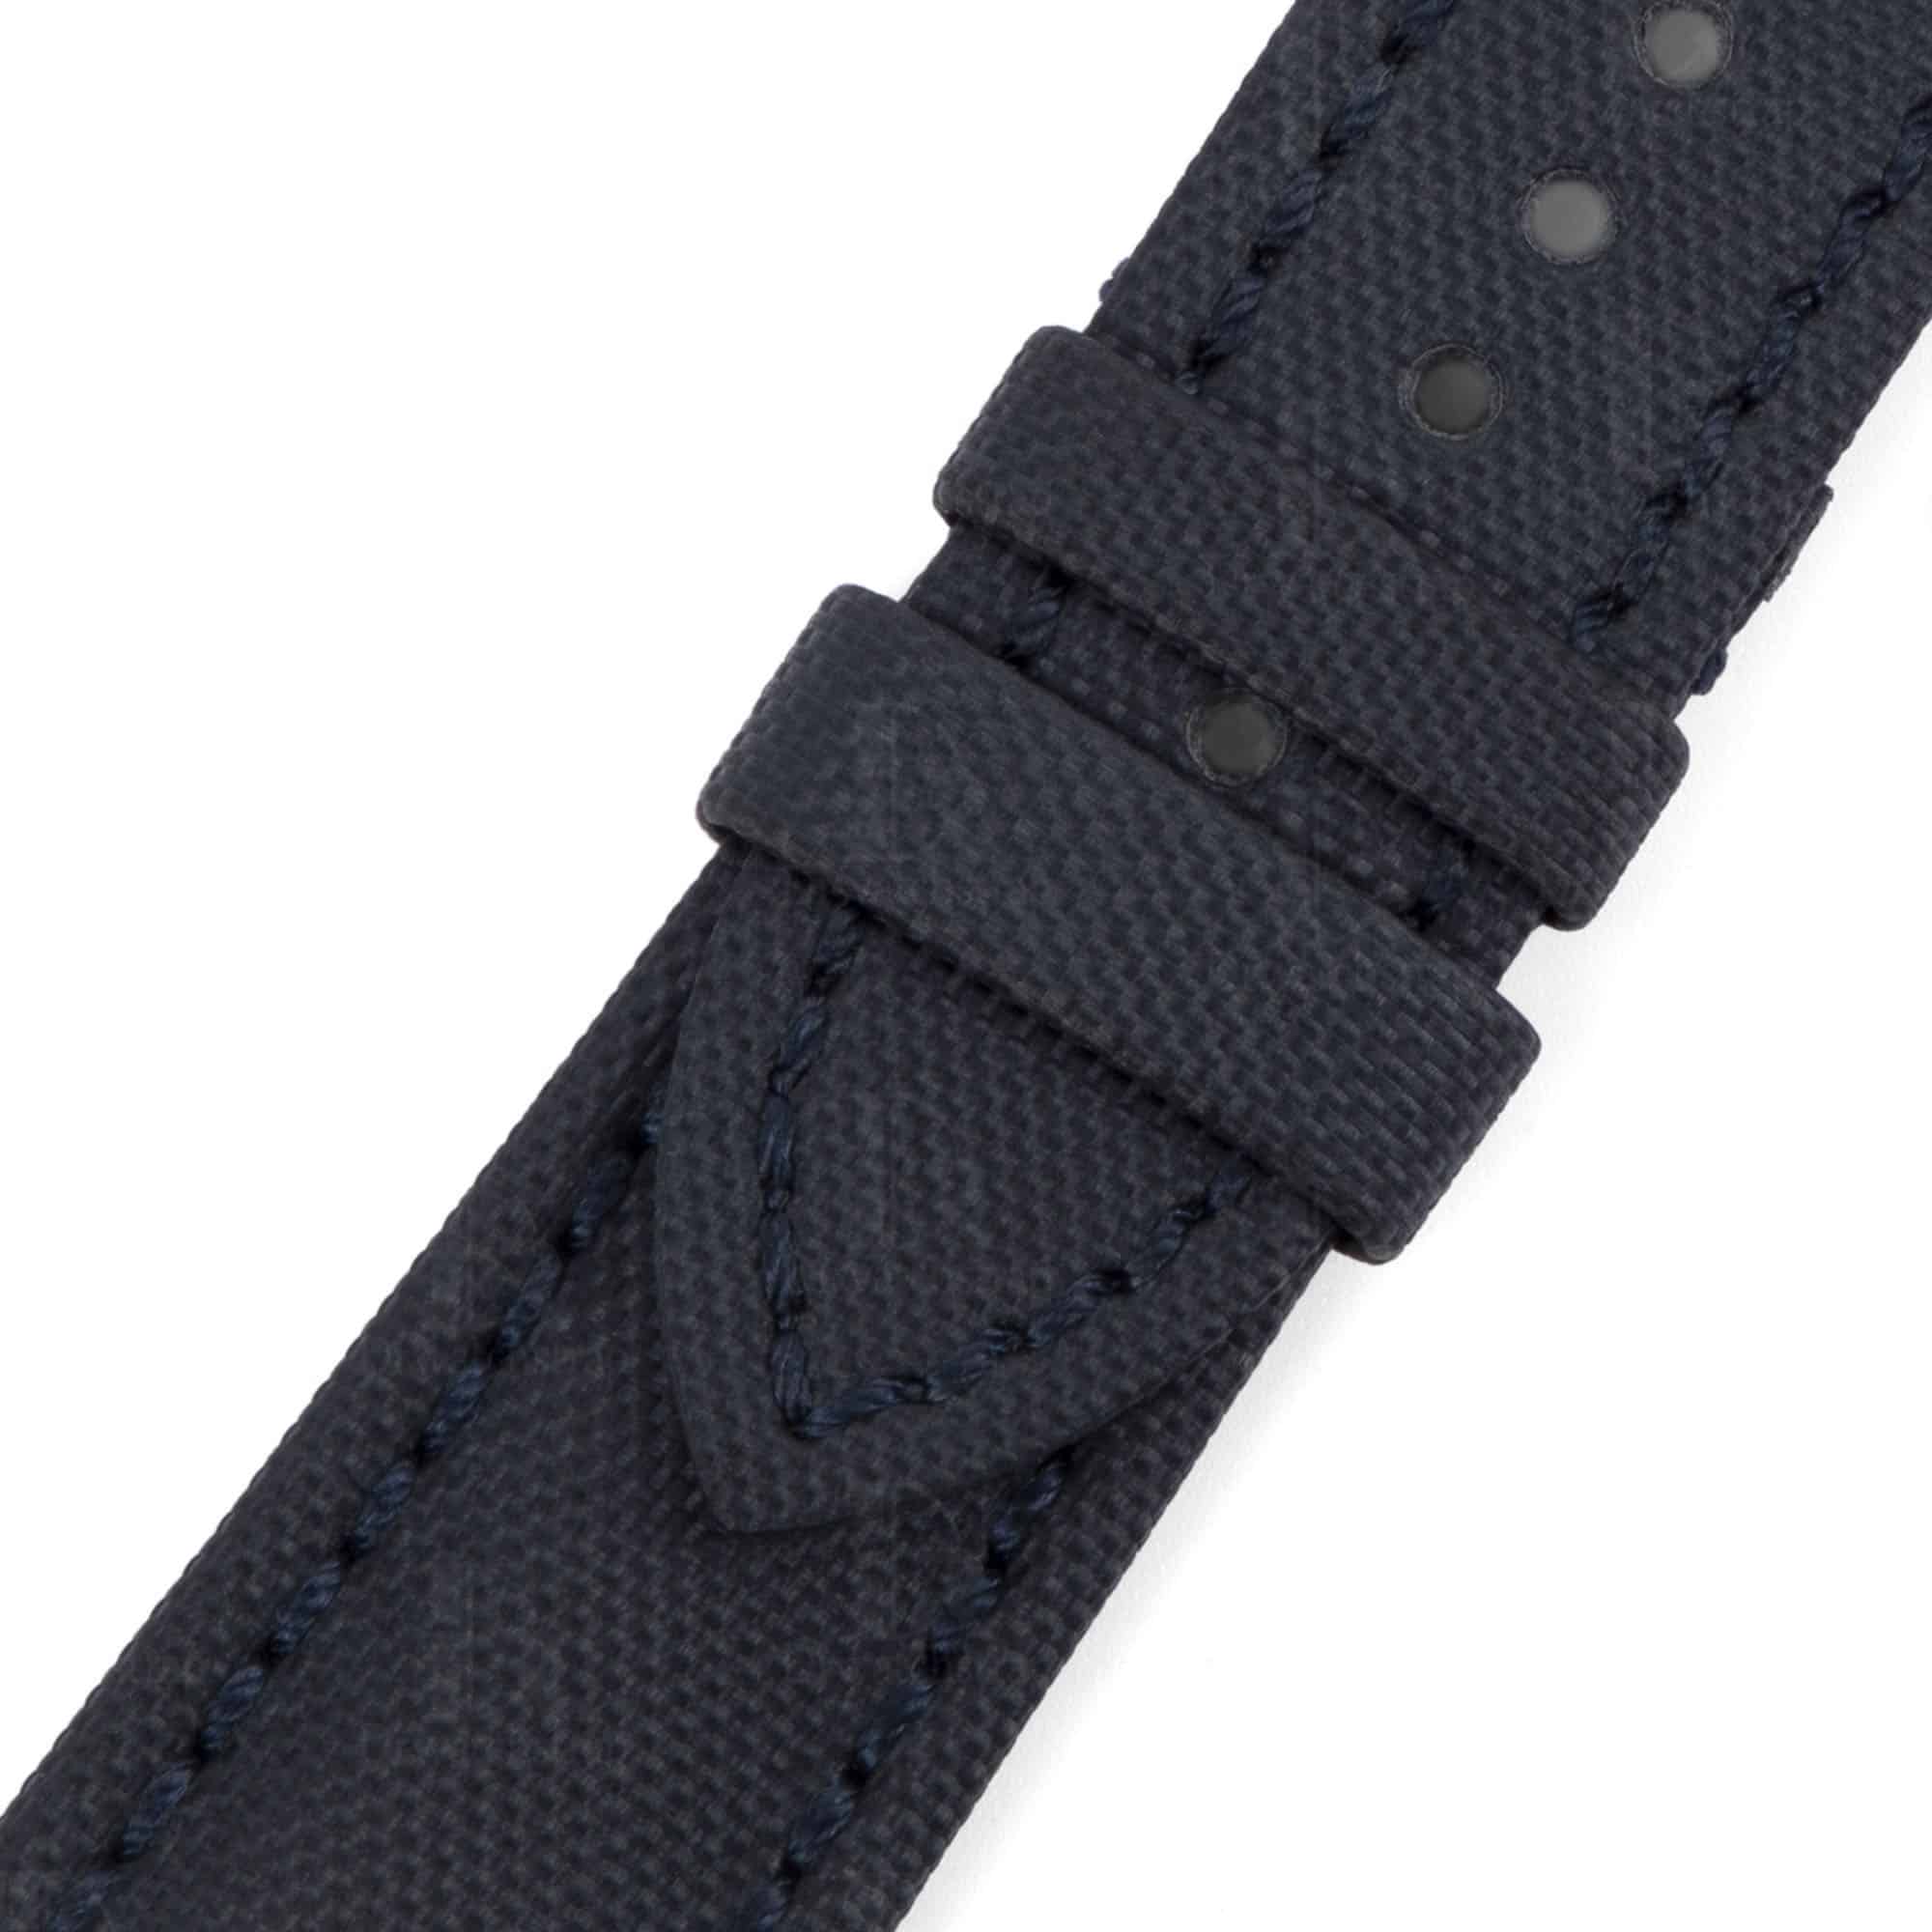 Custom best quality material Blancpain Fifty Fathoms canvas replacement sailcloth nylon watch strap online and watch bands suitable with Blancpain watches 20mm 23mm luruxy band